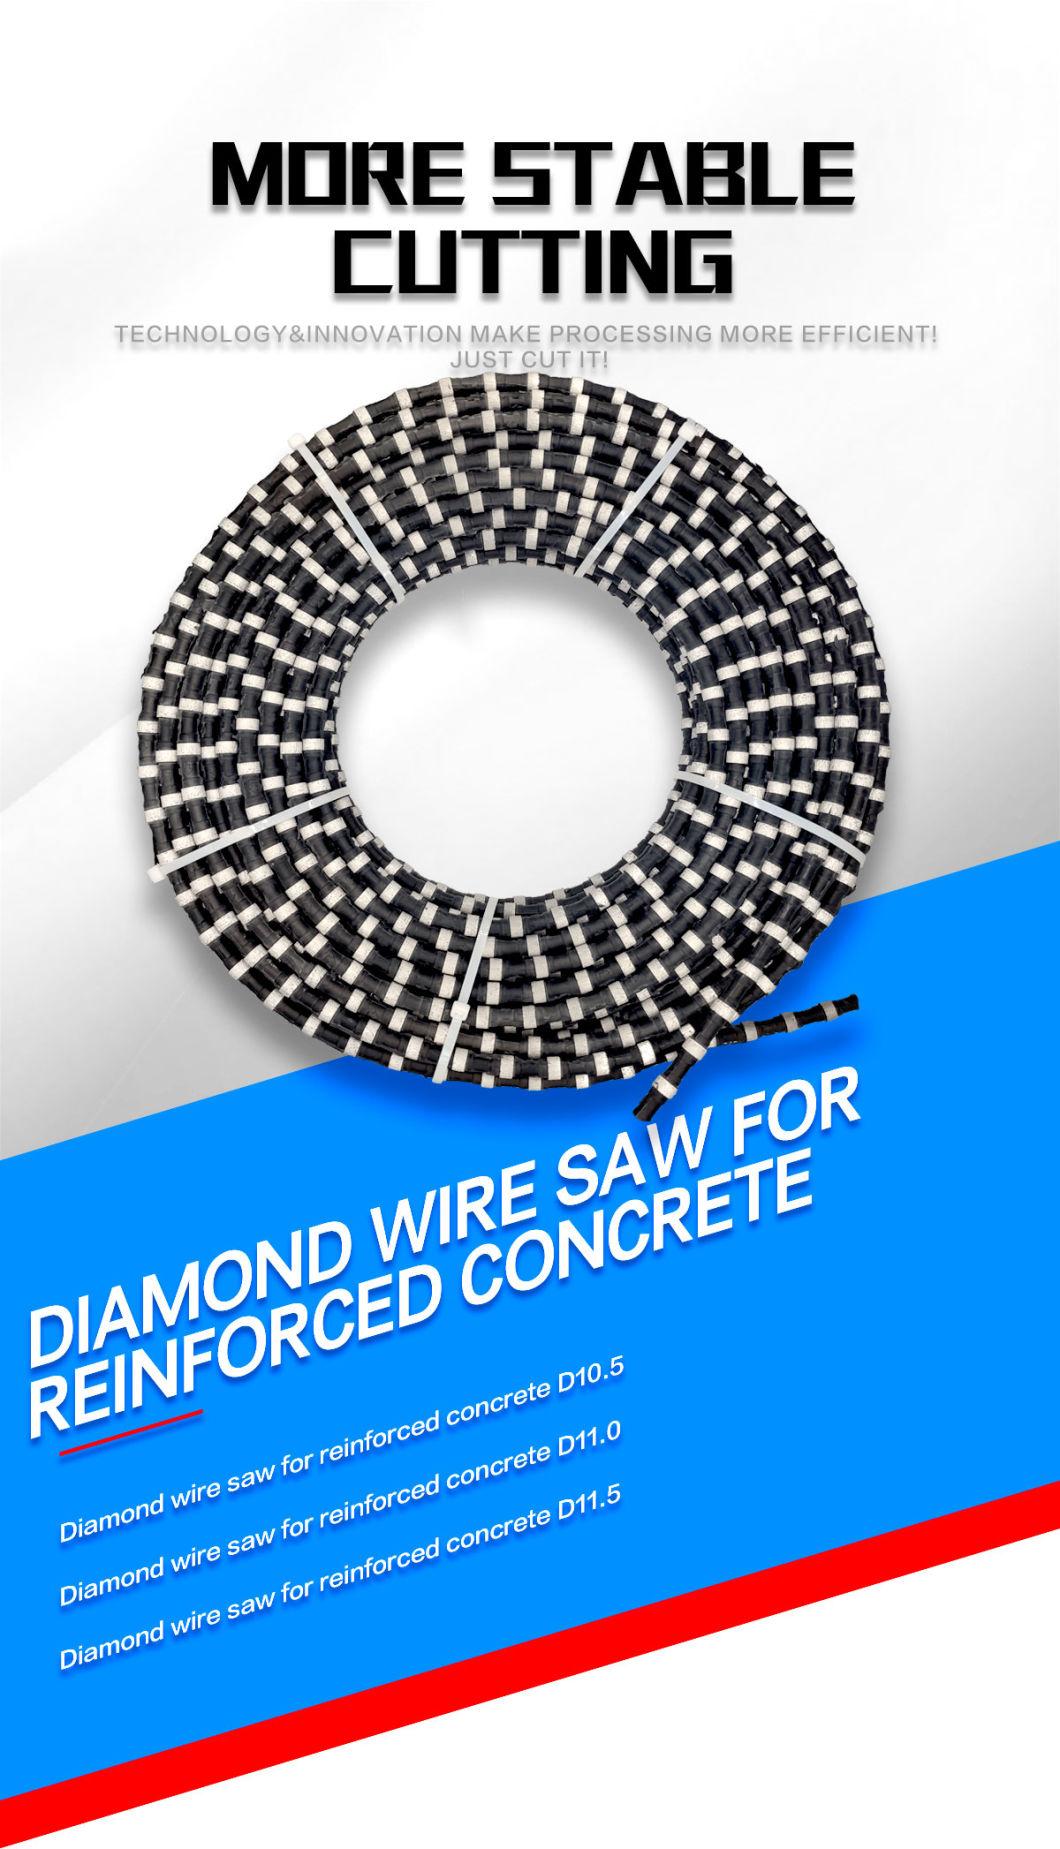 Reinforced Concrete Wire Saw China Diamond Wire Saw for Concrete Cutting Fast Cutting